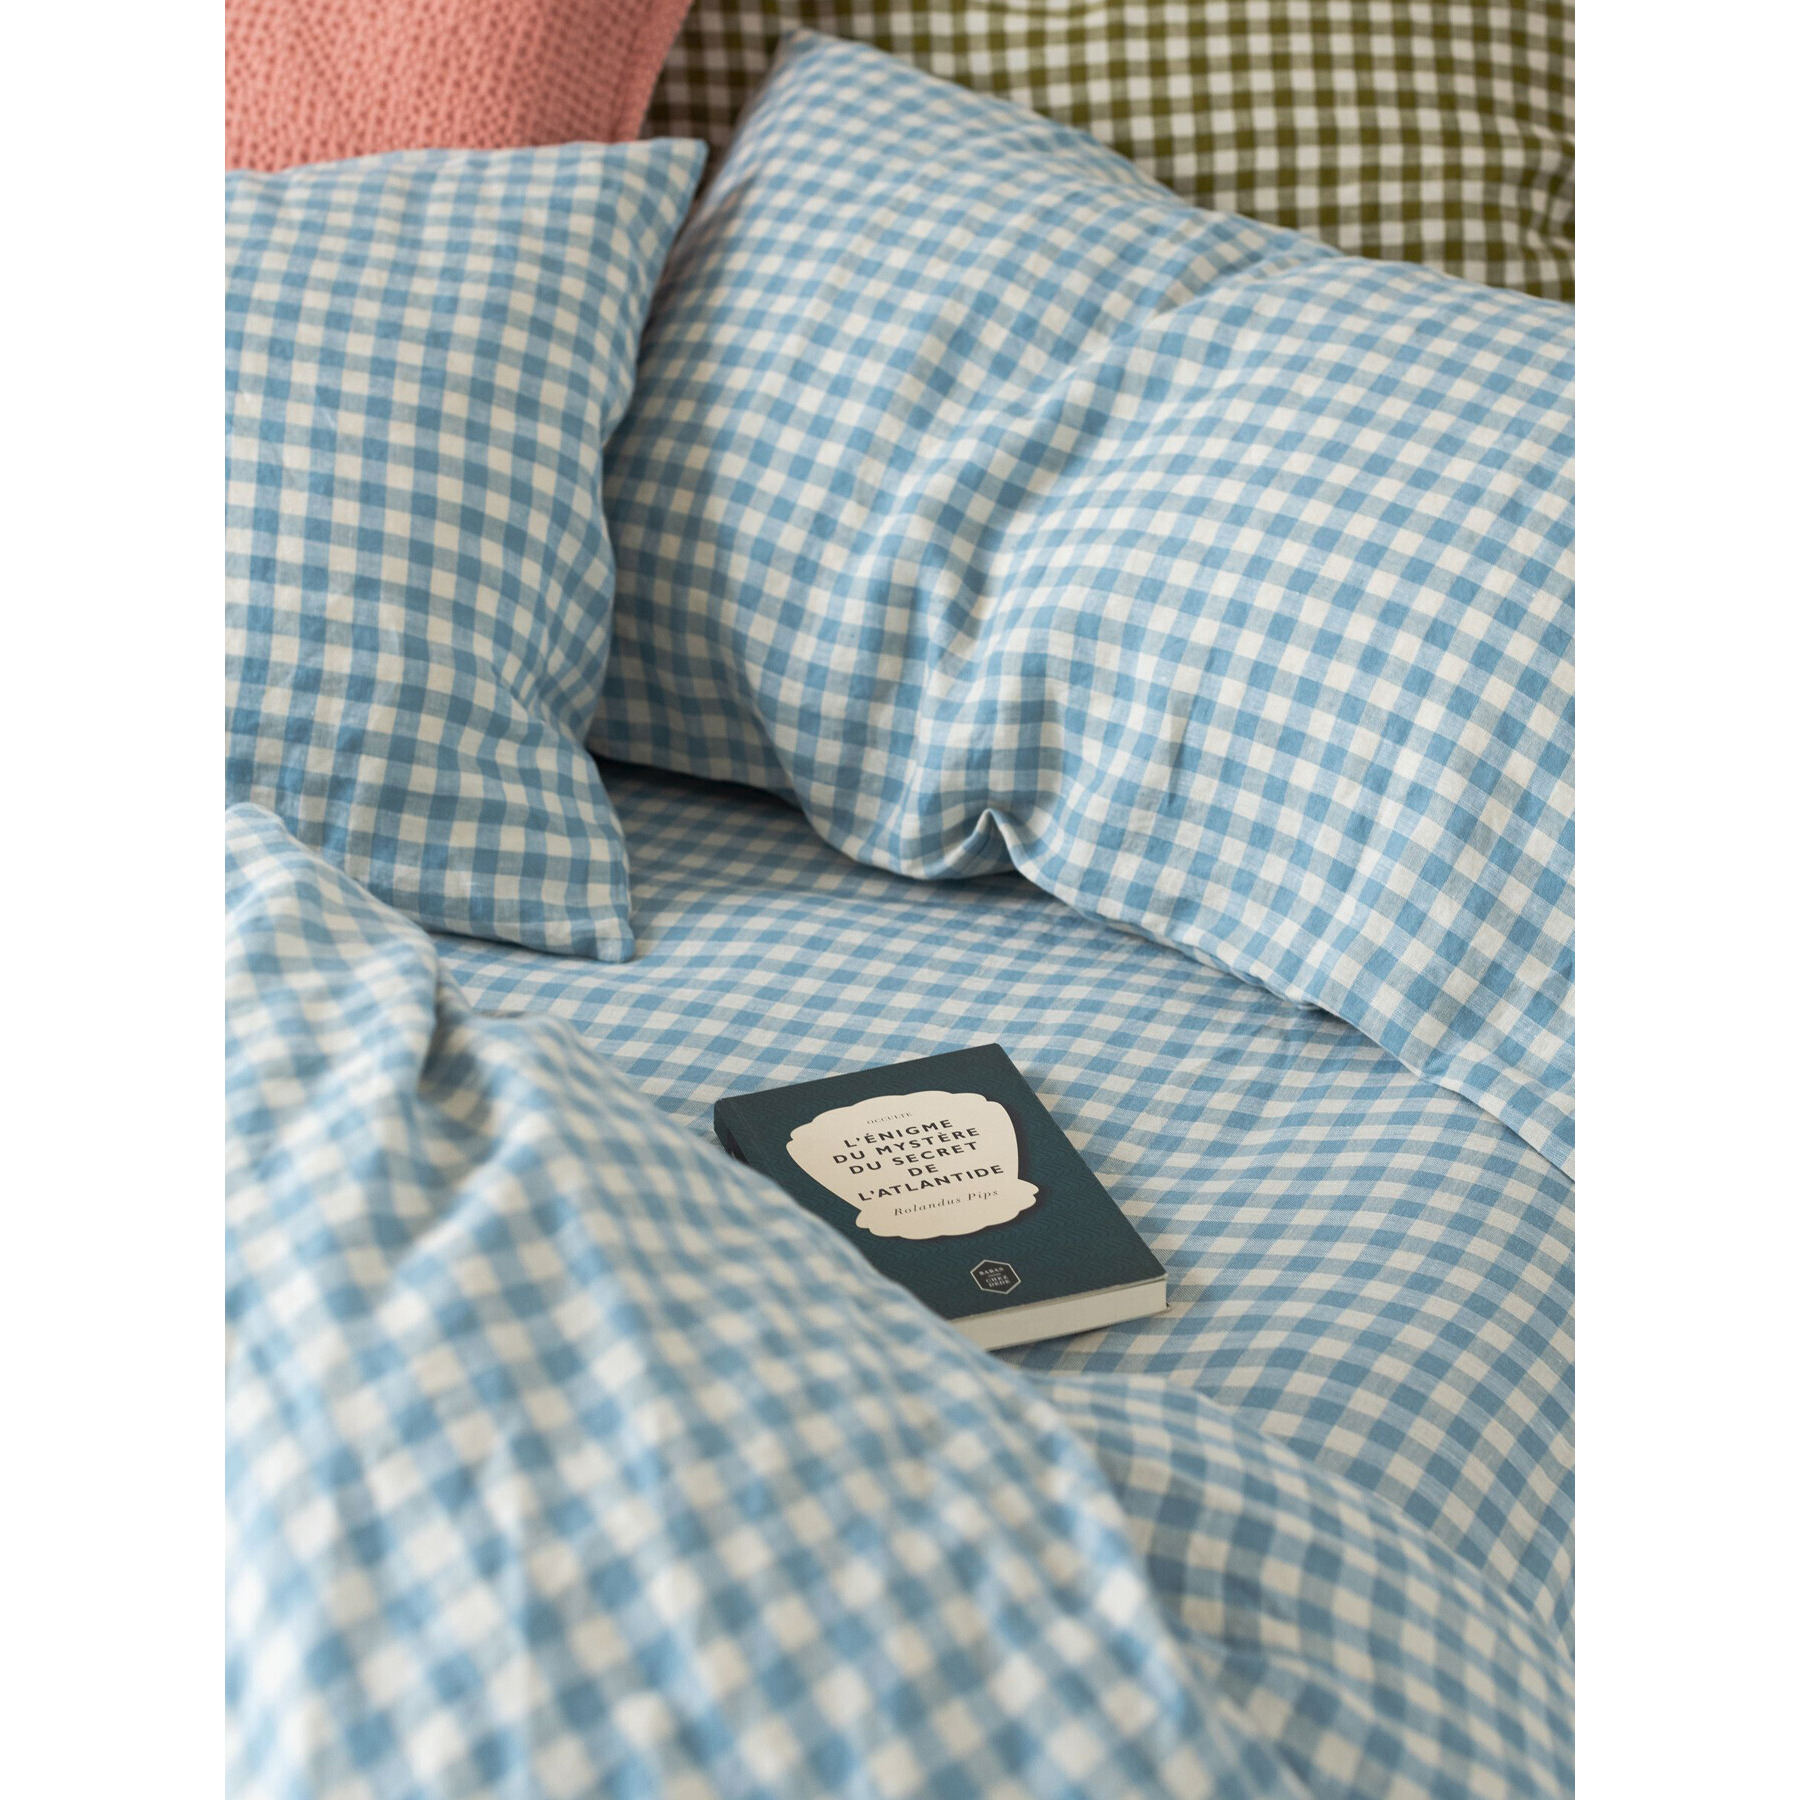 Piglet in Bed Gingham Linen Fitted Sheet - Size King Blue - image 1